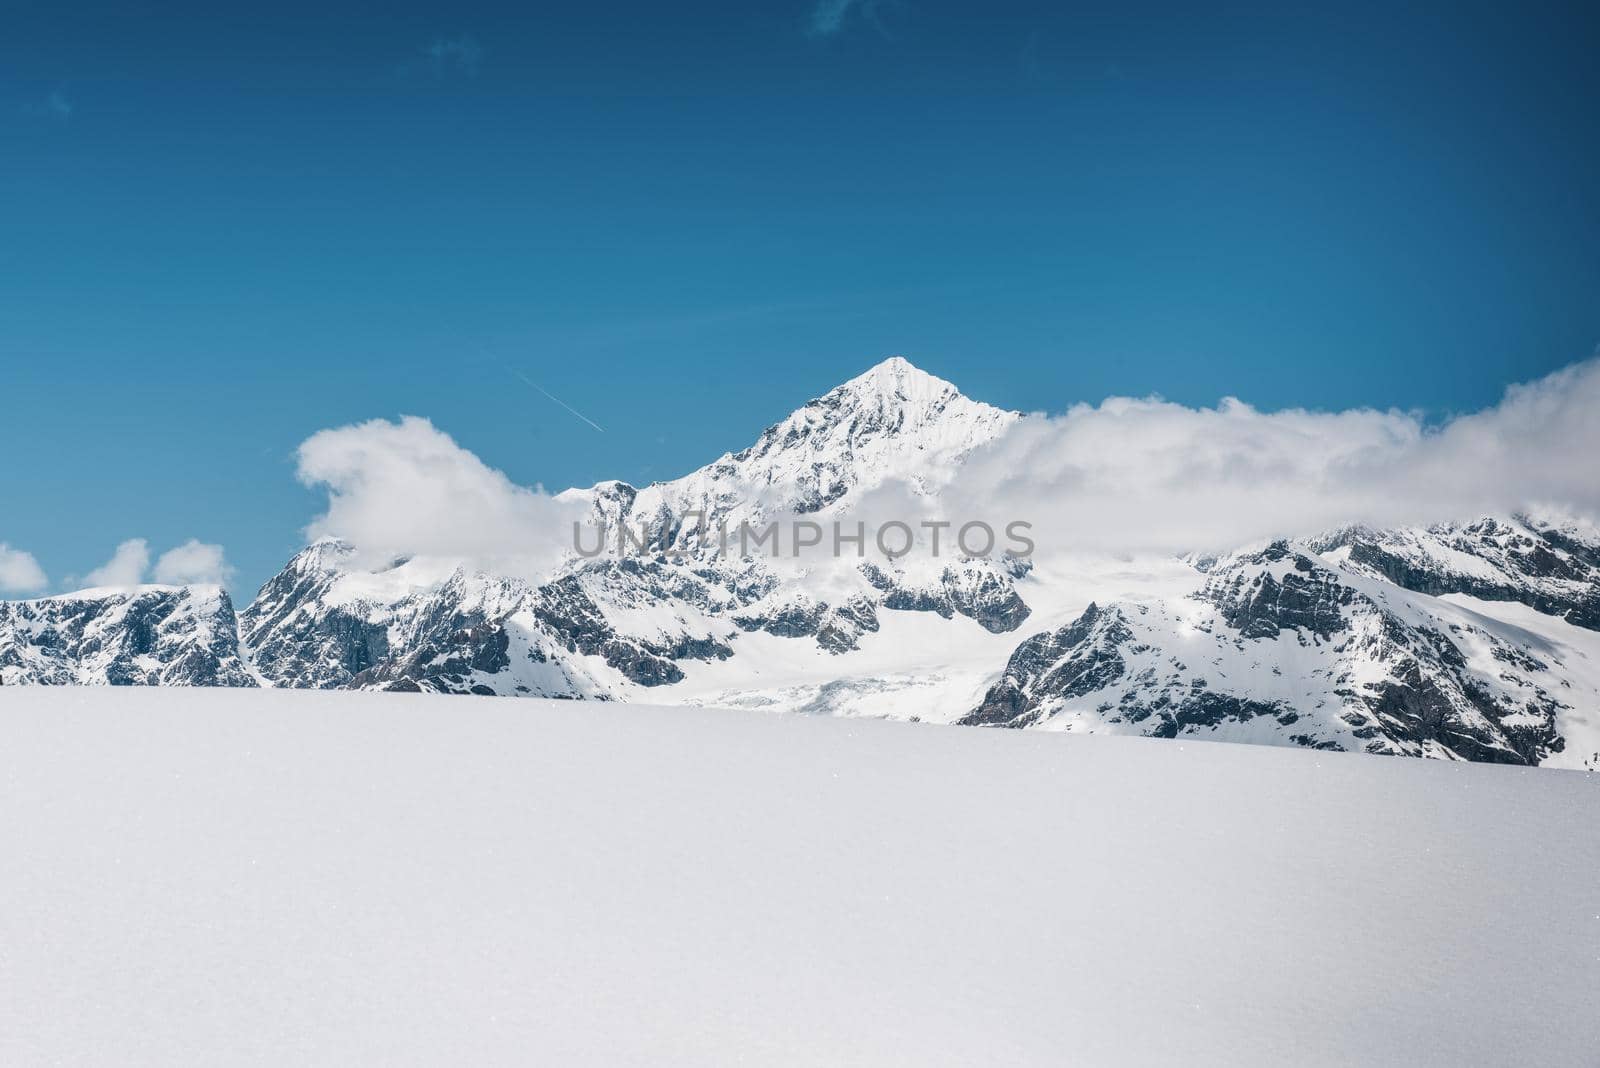 Landscape Scenery View Mountain Snowcapped of Swiss Alps, Mountains Ranges With Snow Ice at Matterhorn Glacier Paradise of Switzerland. Travel Expedition and Destination of Alpine Switzerland